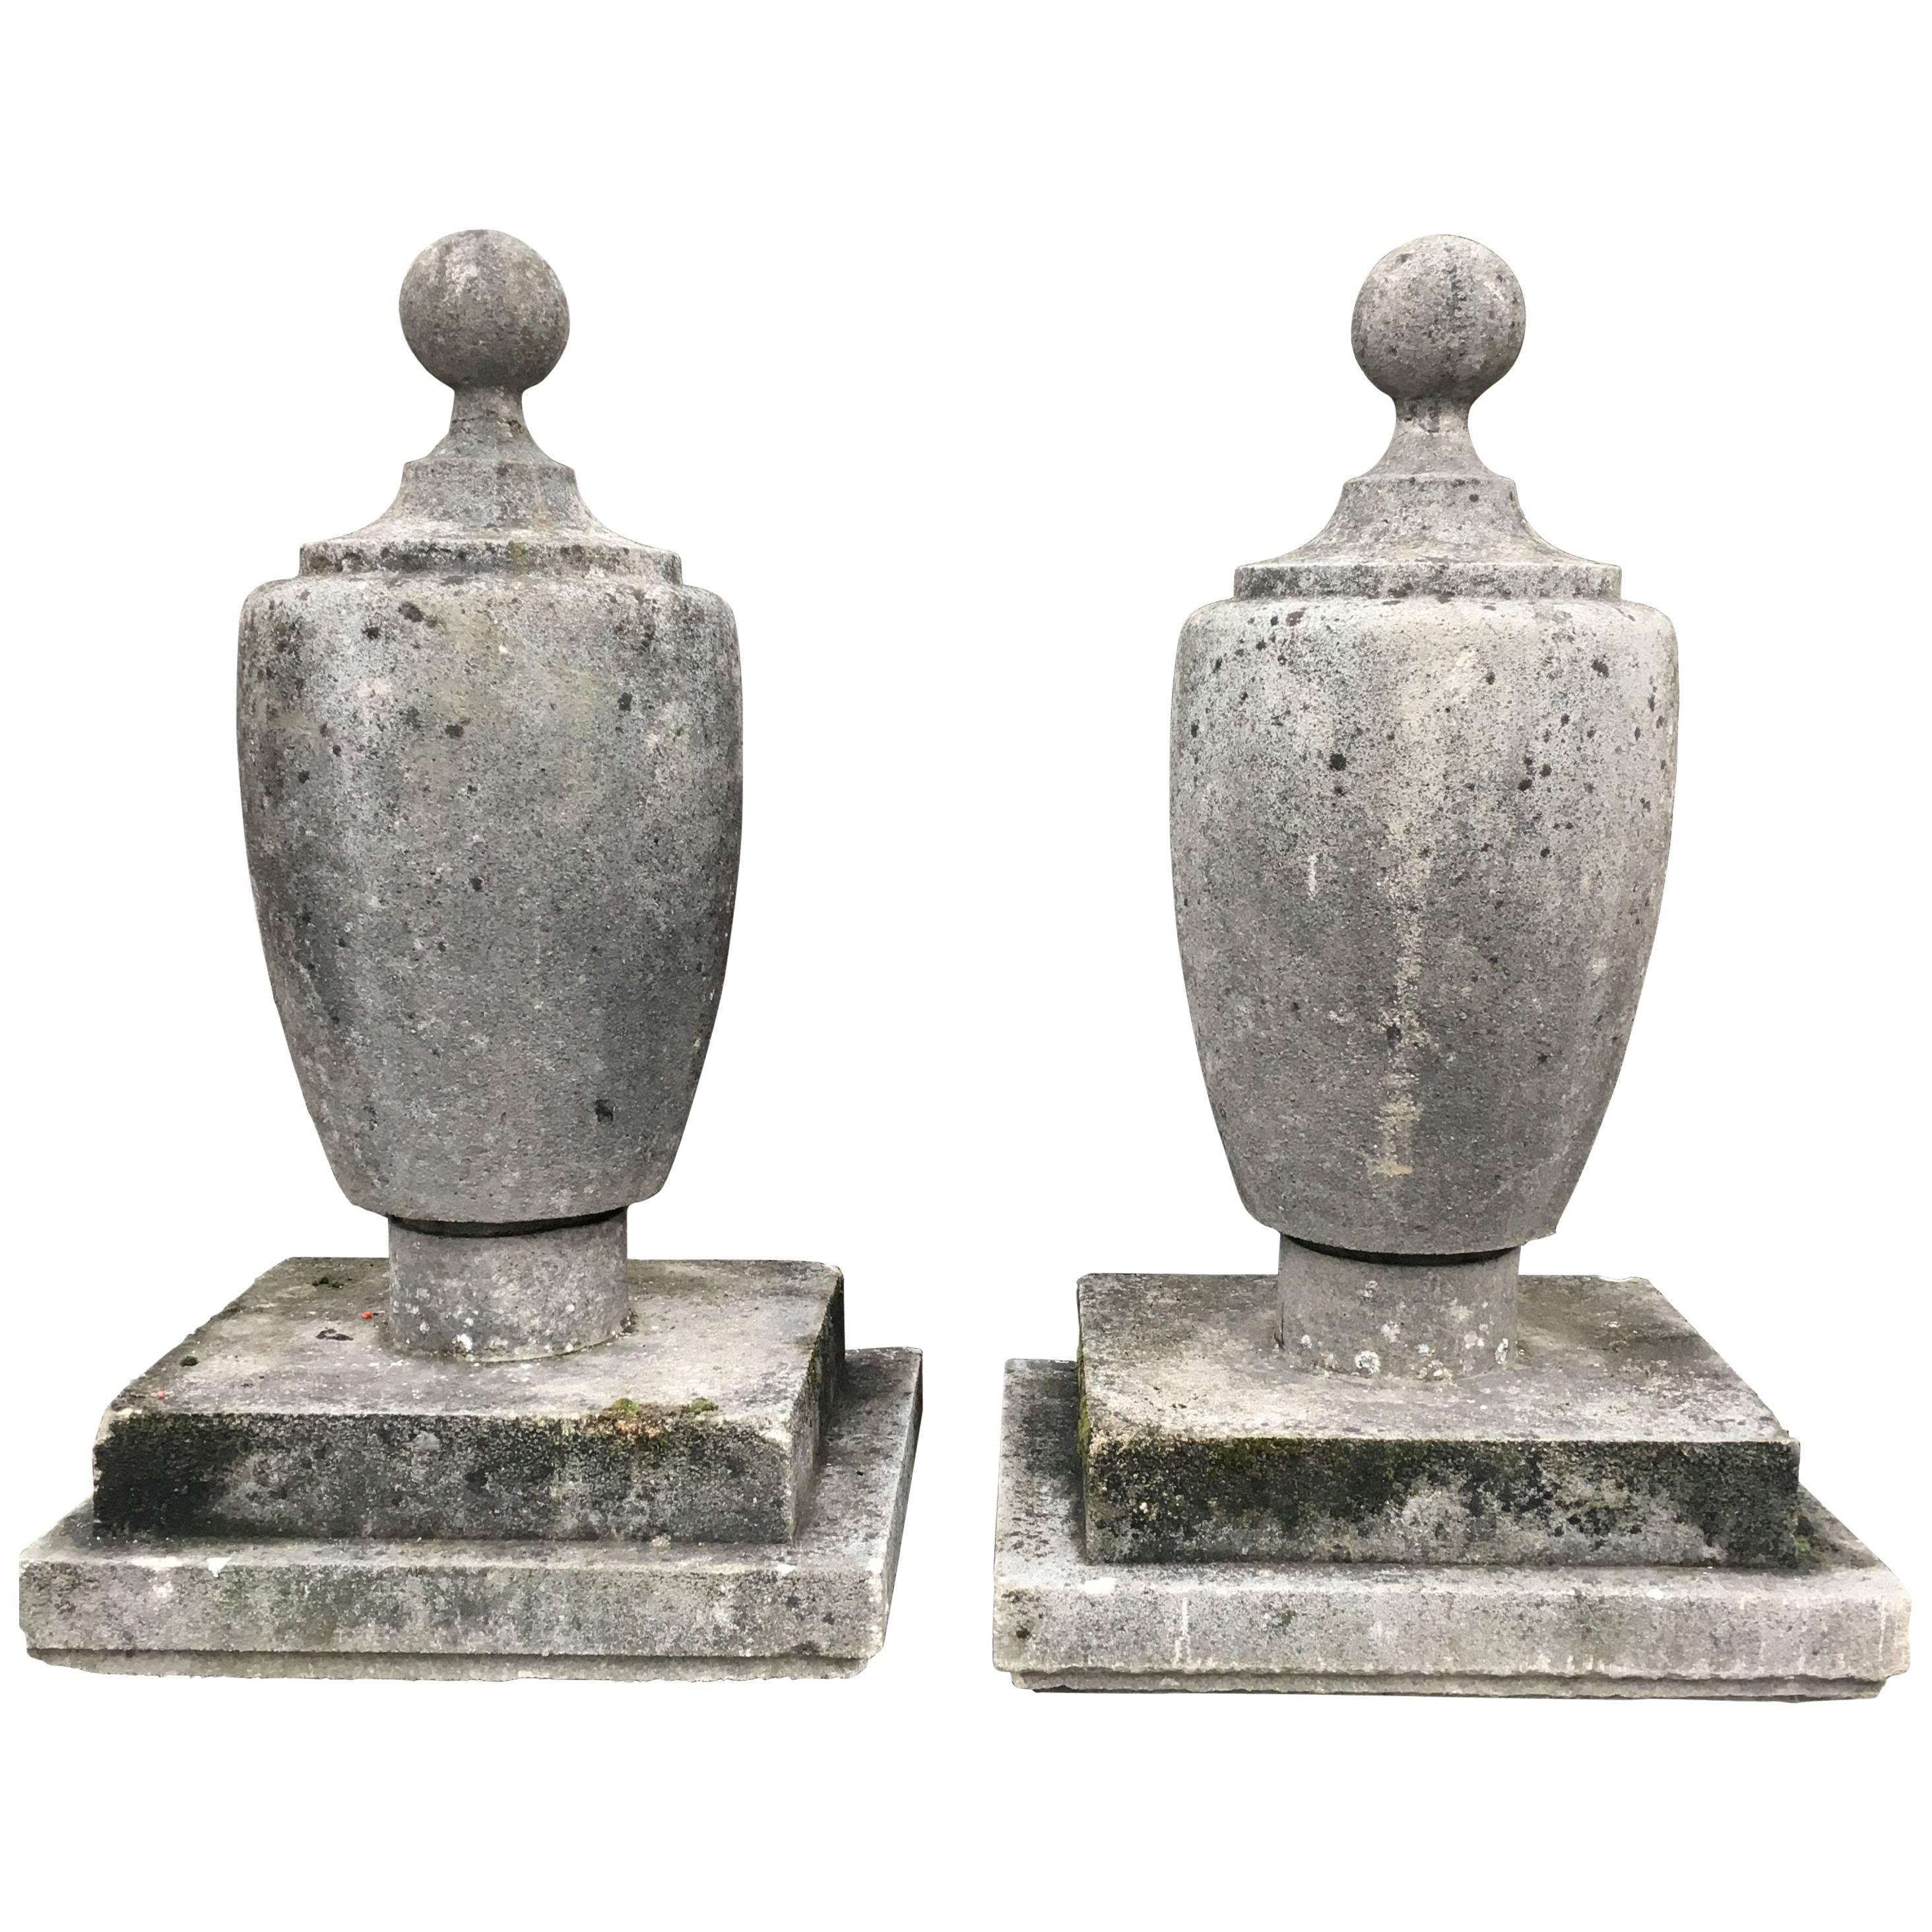 Pair of Large Statuesque English Cast Stone Art Deco Finials